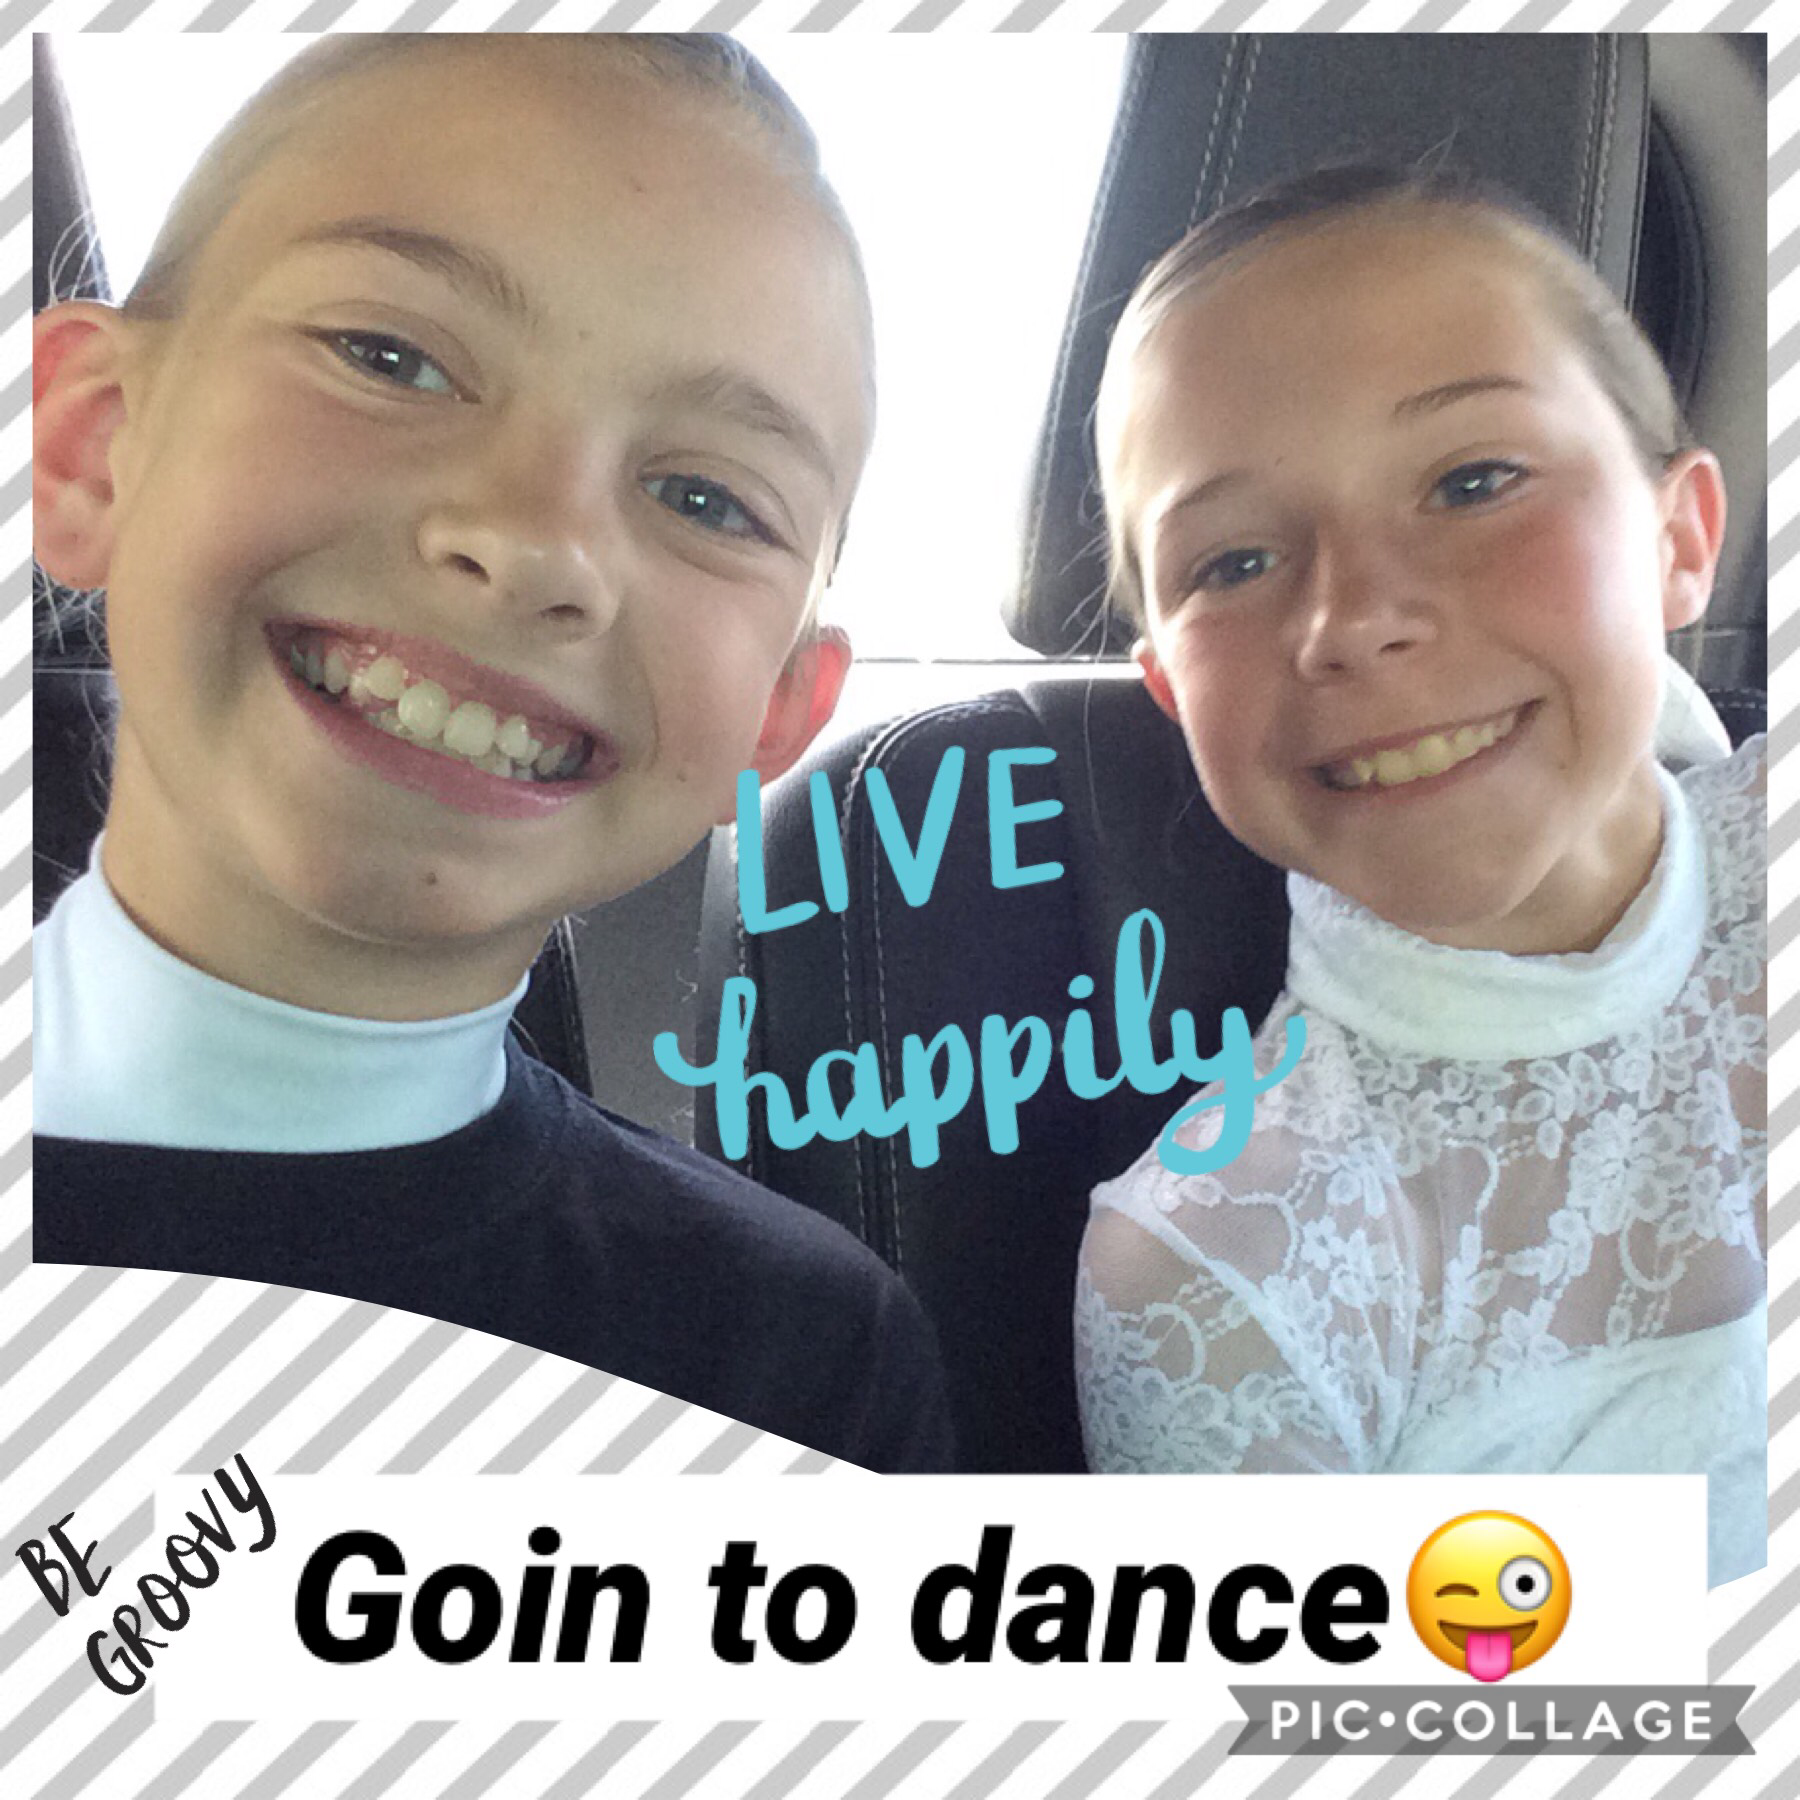 Me and my bestie going to dance